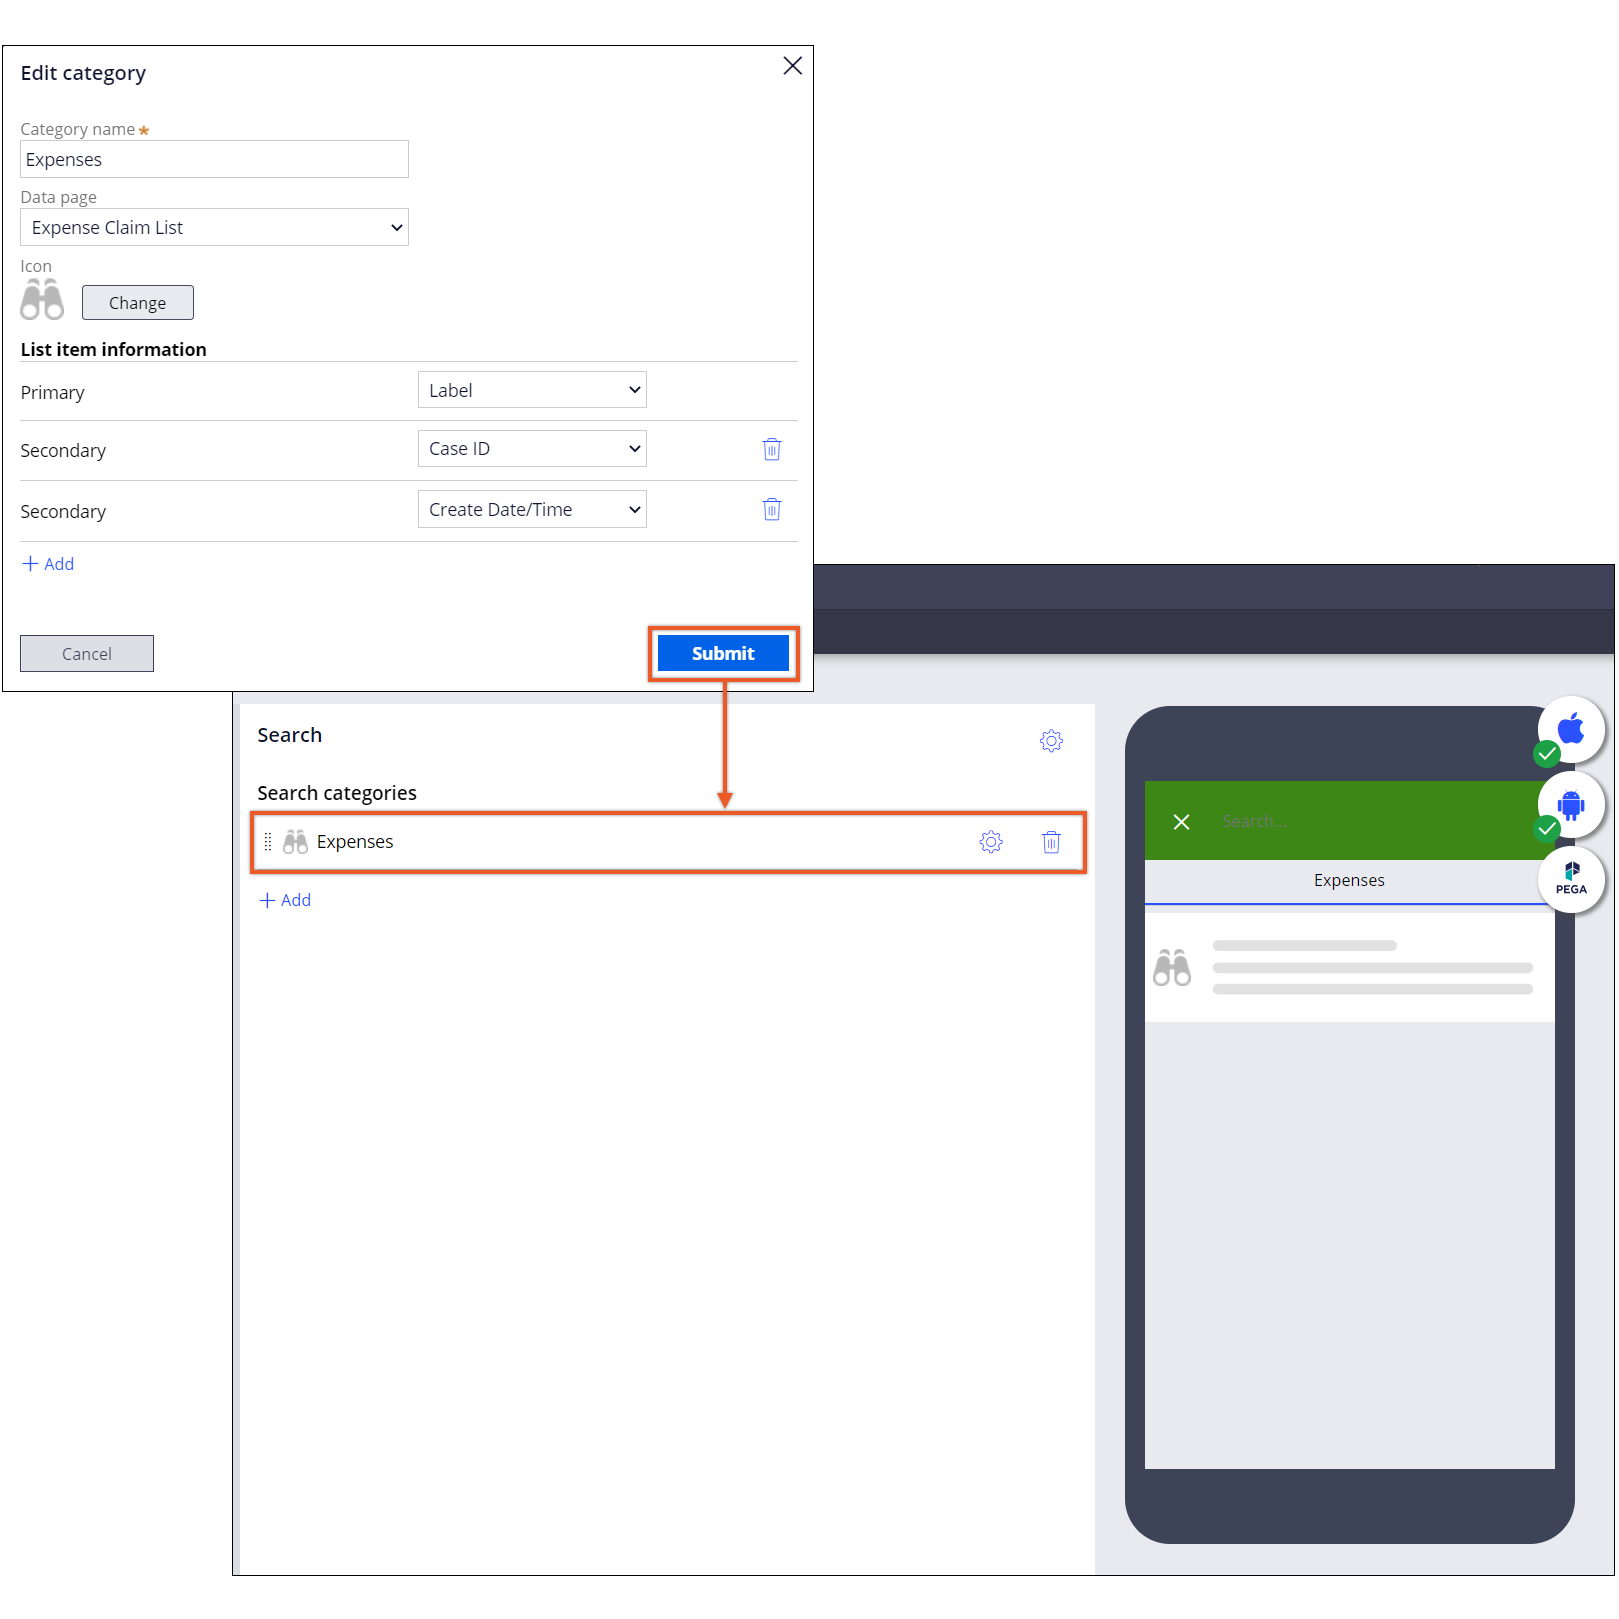 The image shows Pega Platform's mobile channel and a flow for configuring a mobile search gadget.